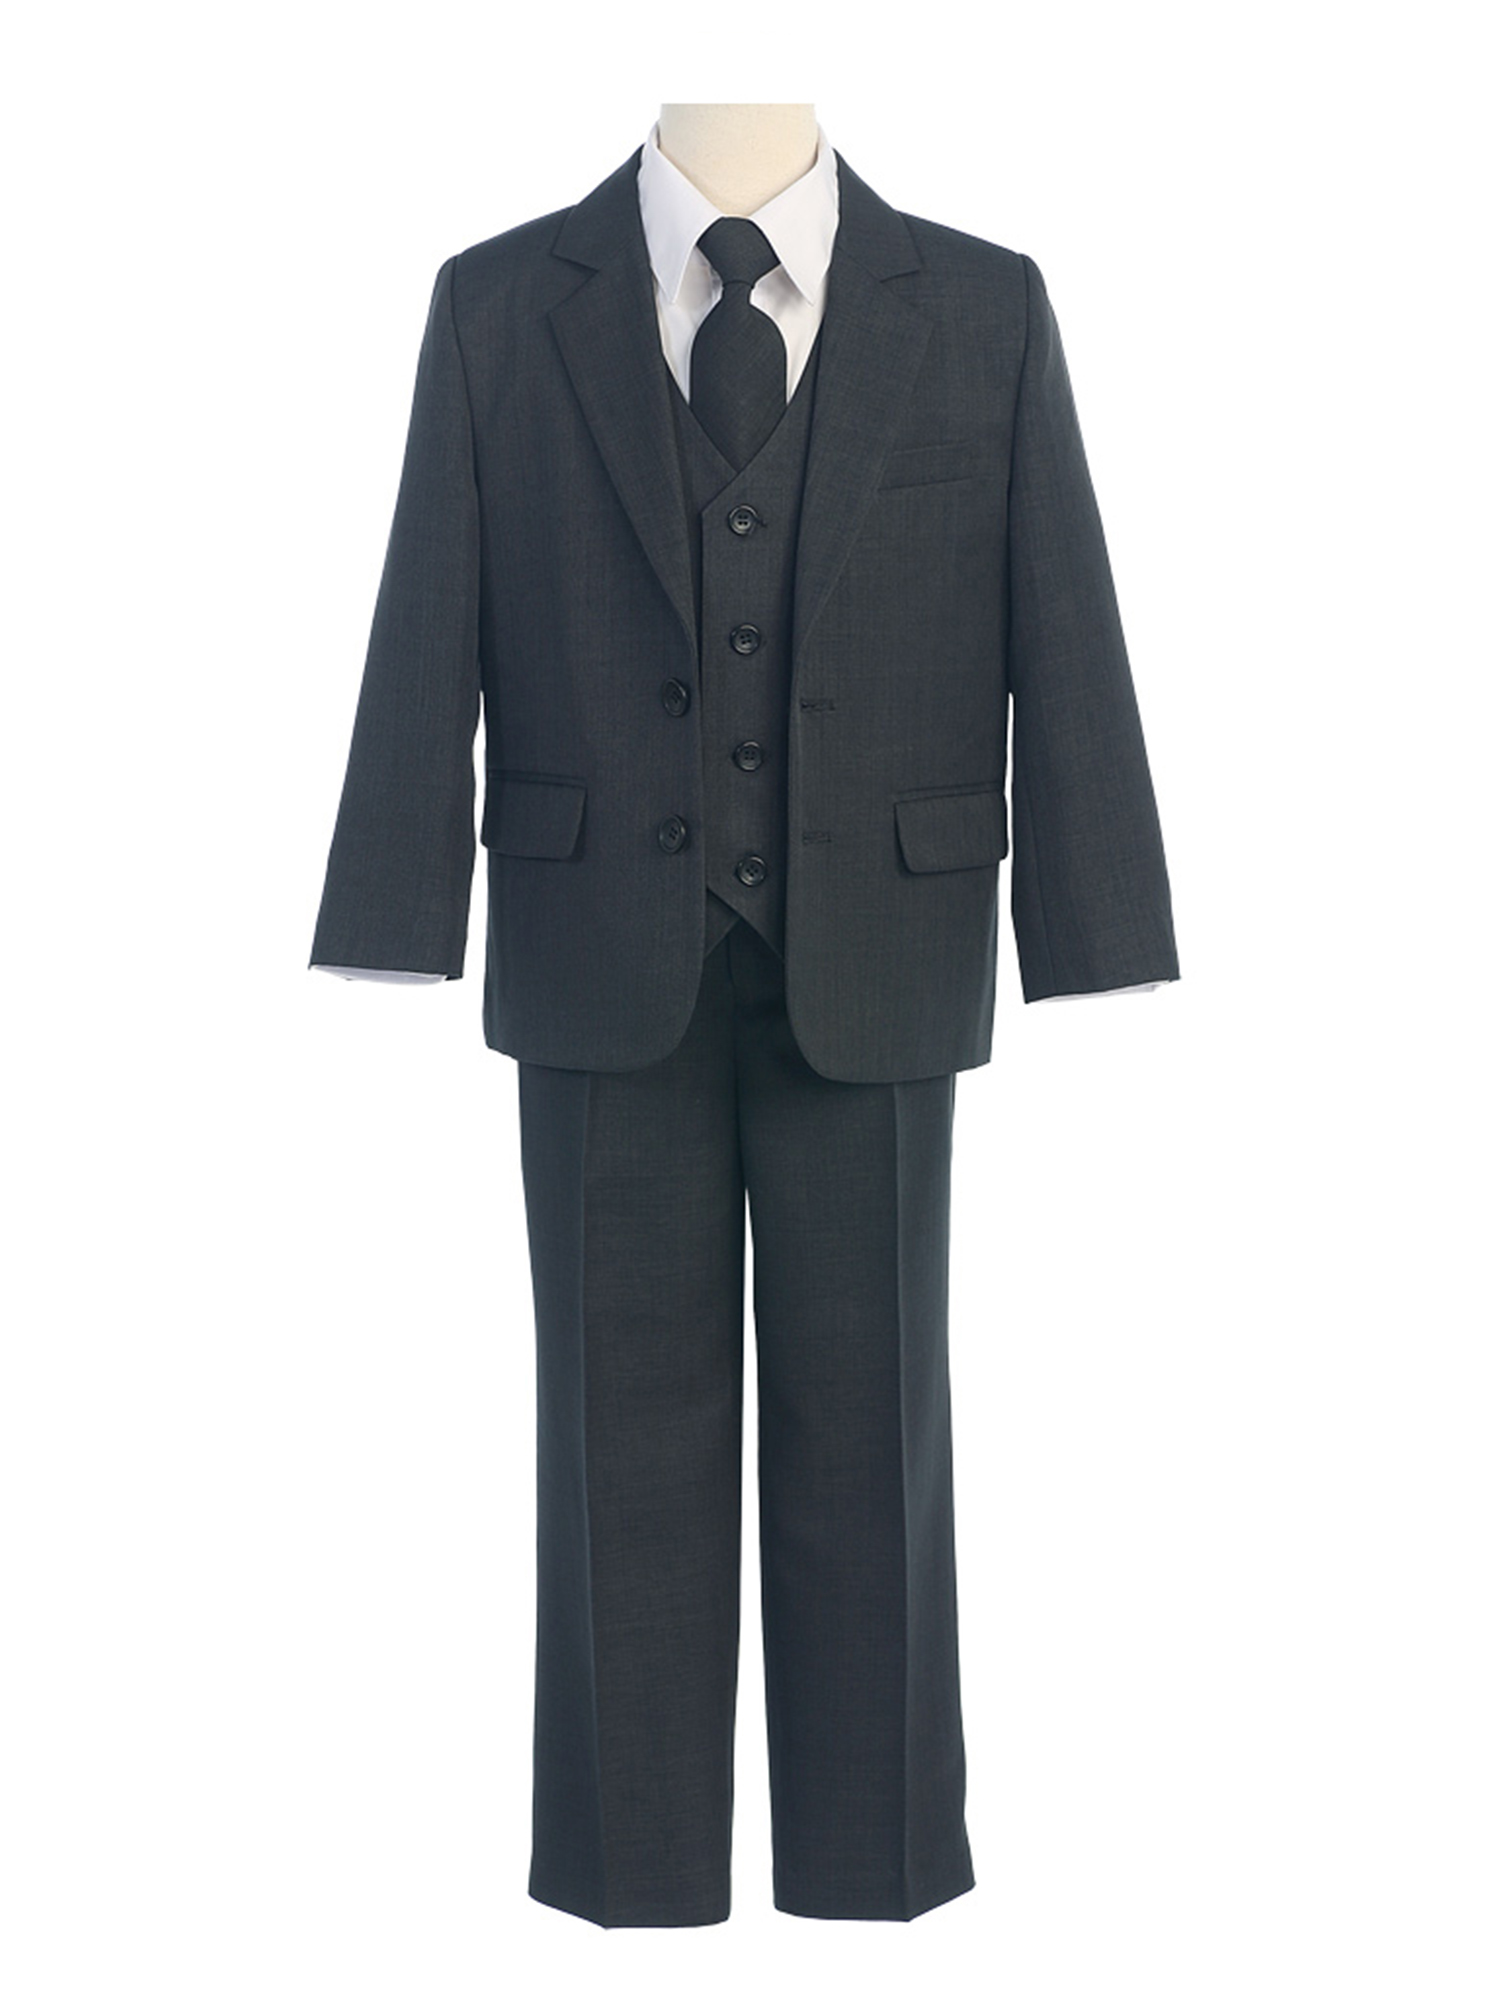 COLE Boys Suit with Shirt and Vest (5-Piece) - Charcoal Grey - Size 3